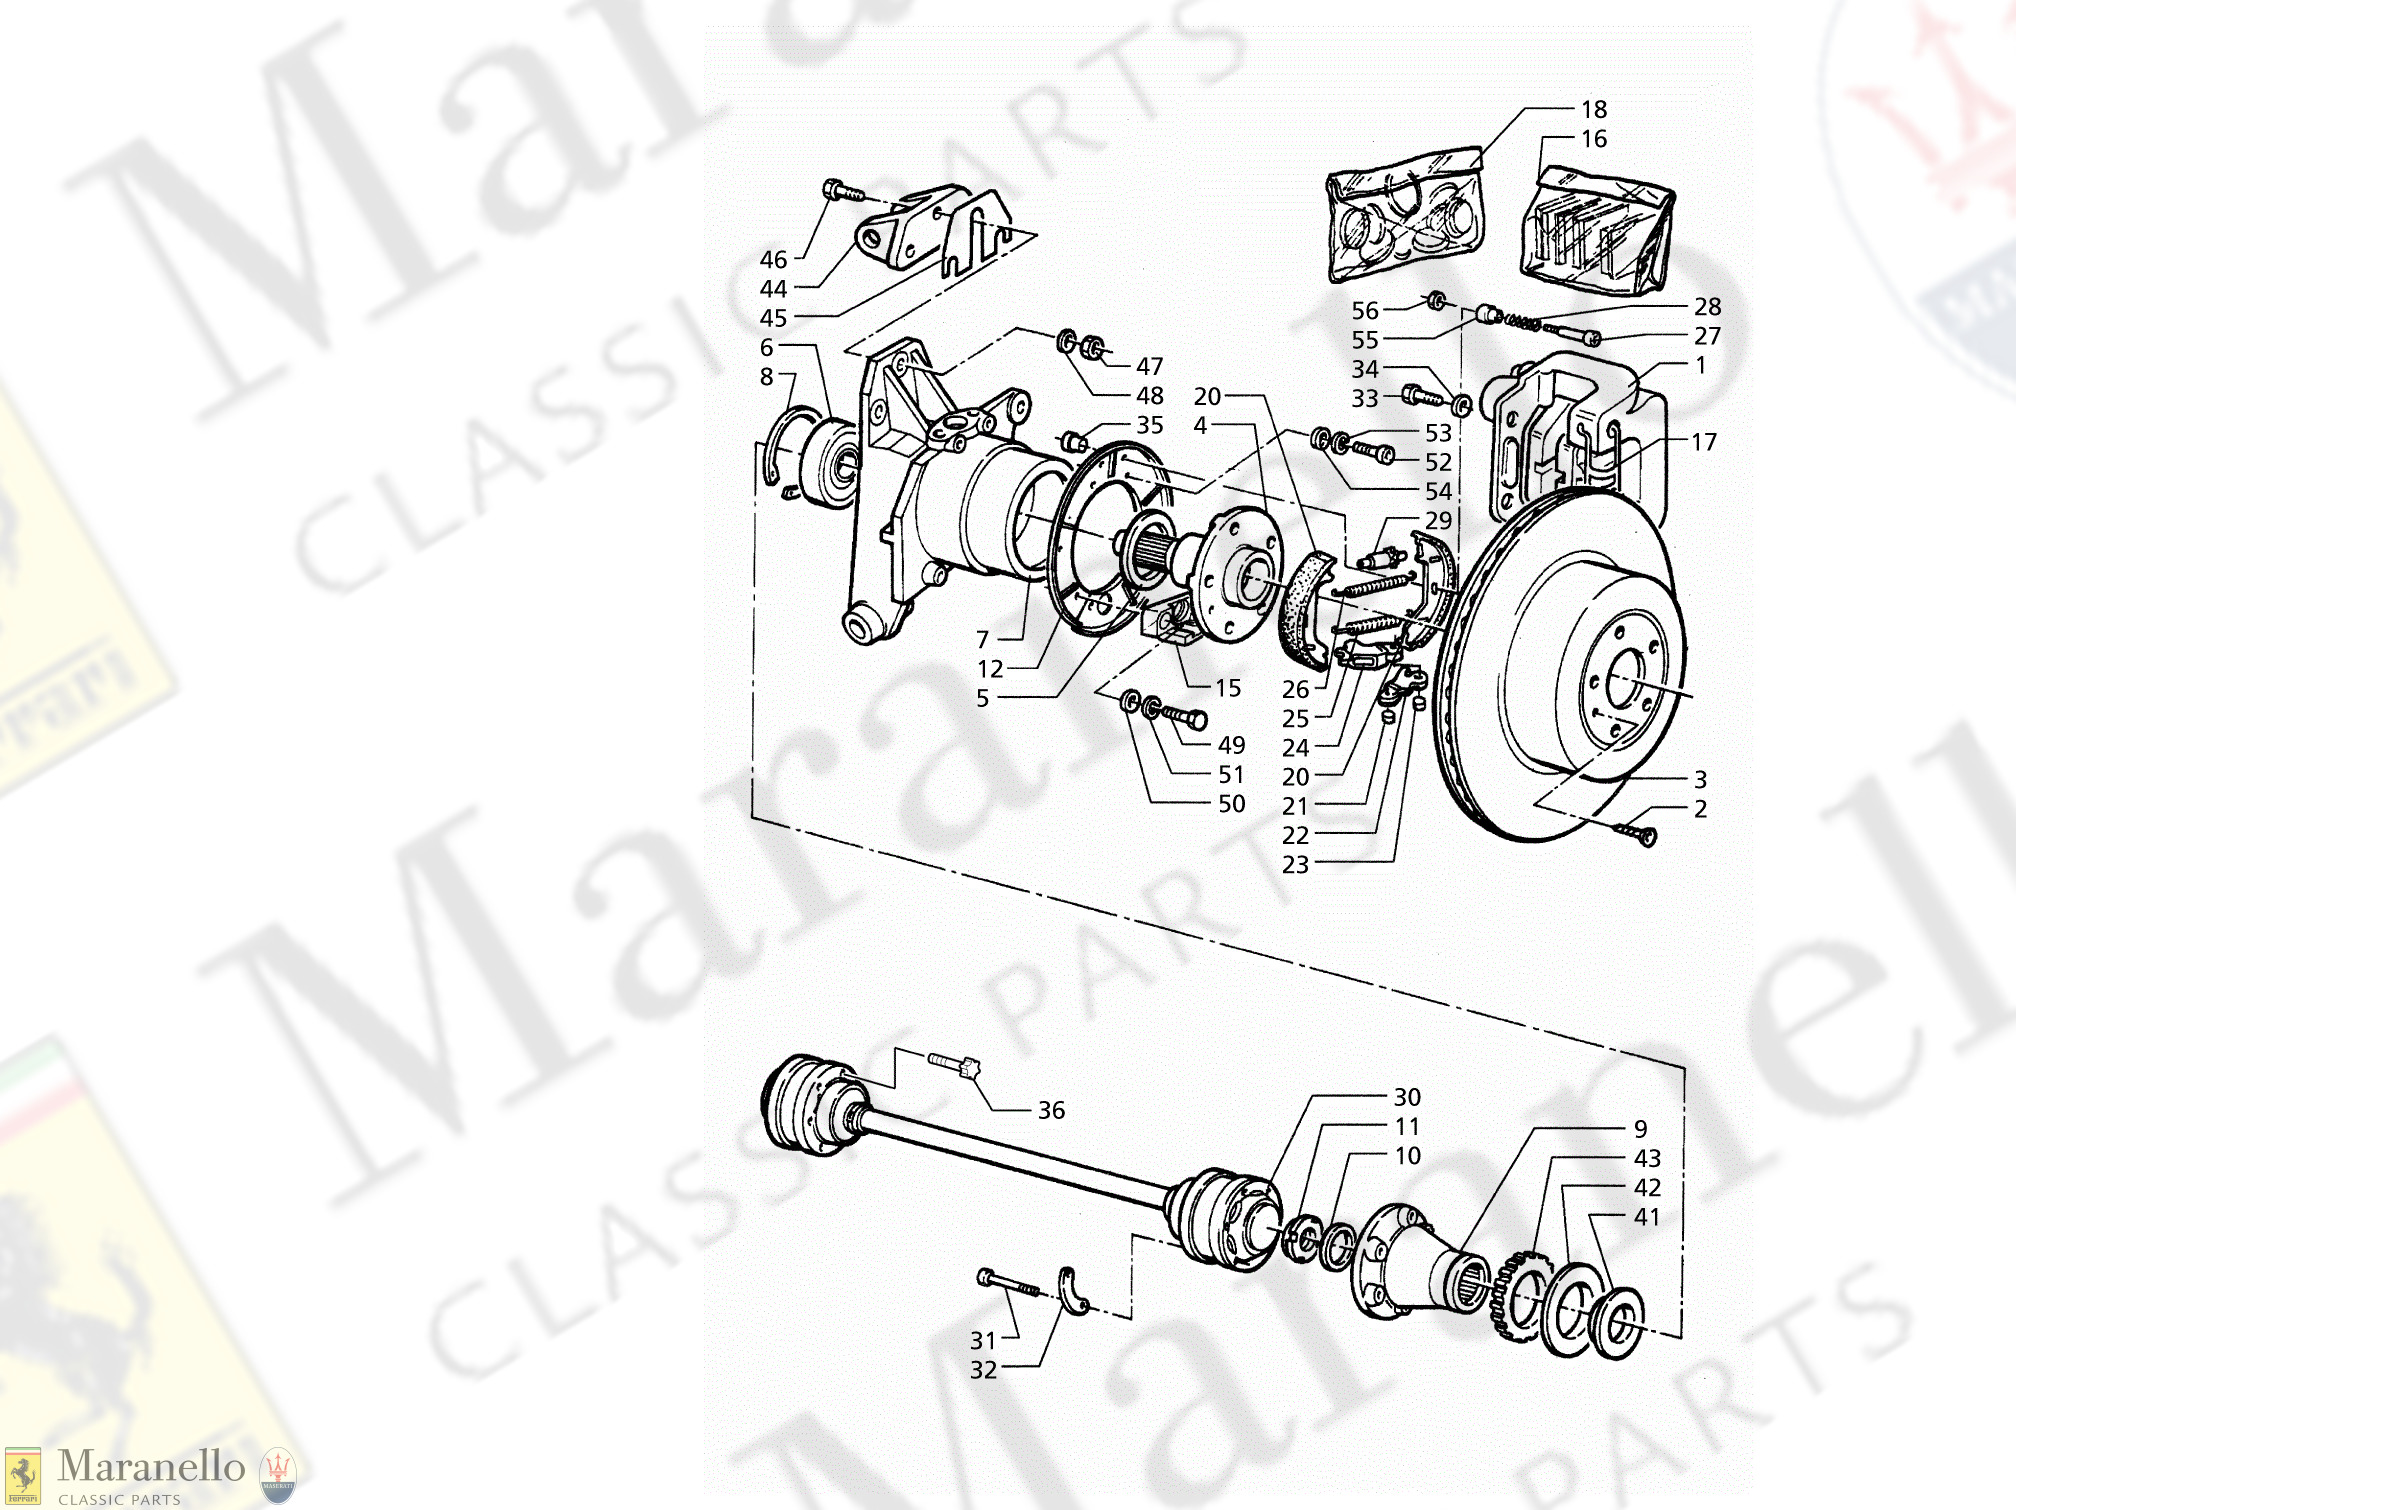 C 39 - Hubs, Rear Brakes With Abs And Drive Shafts